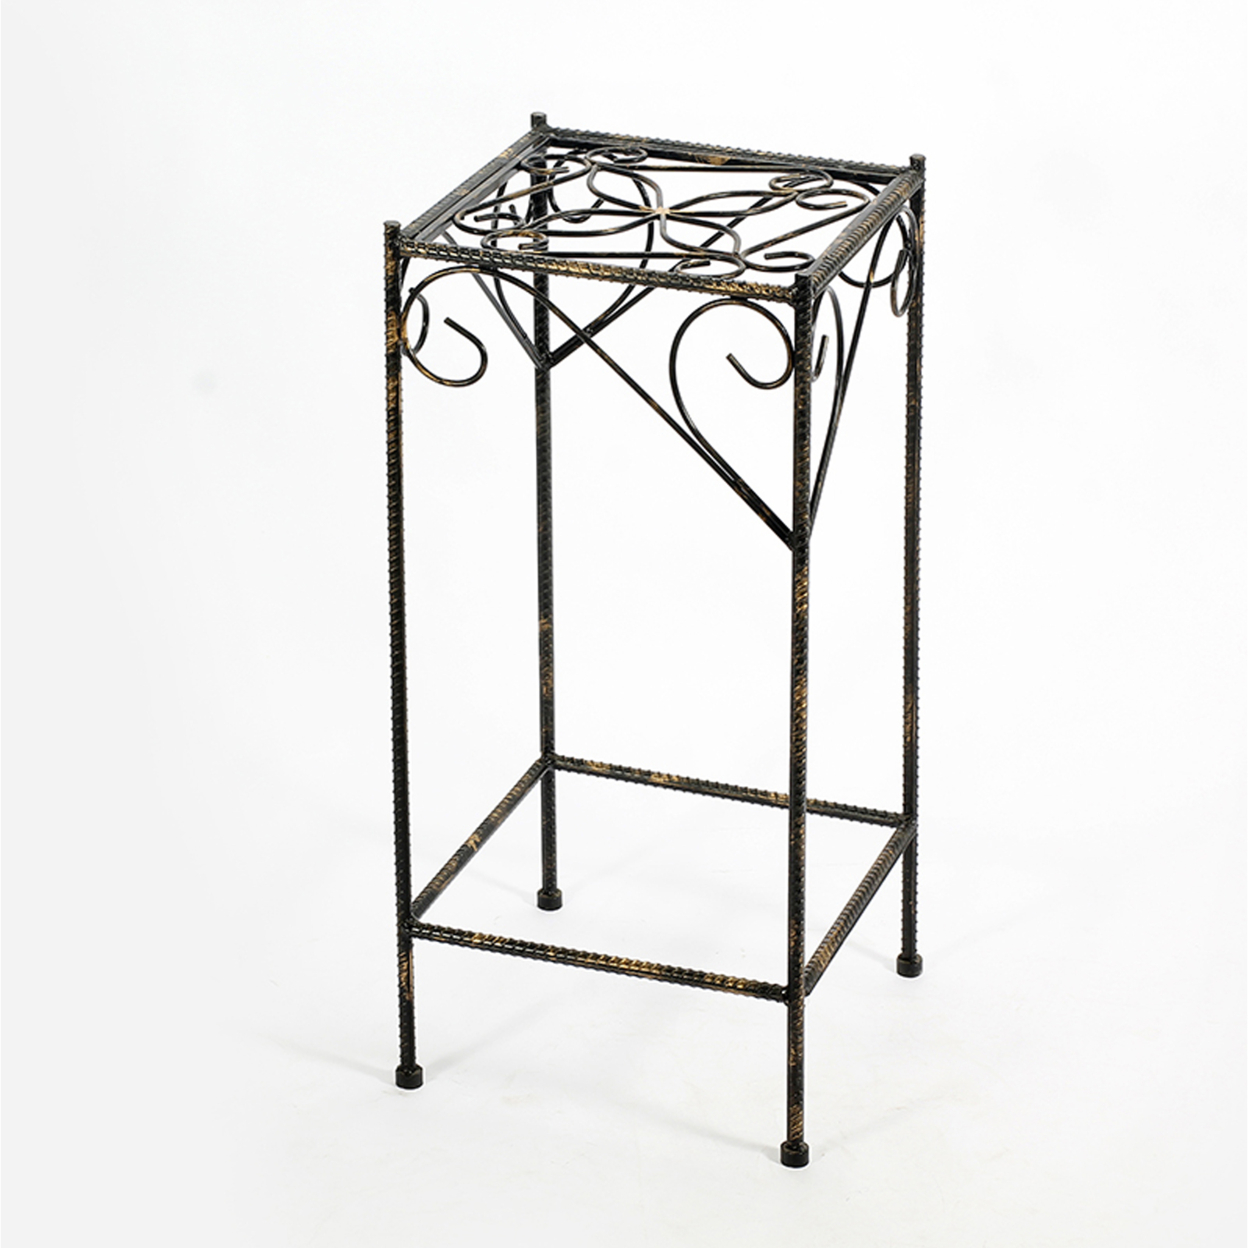 Scrolled Metal Frame Plant Stand With Square Top, Large, Black- Saltoro Sherpi